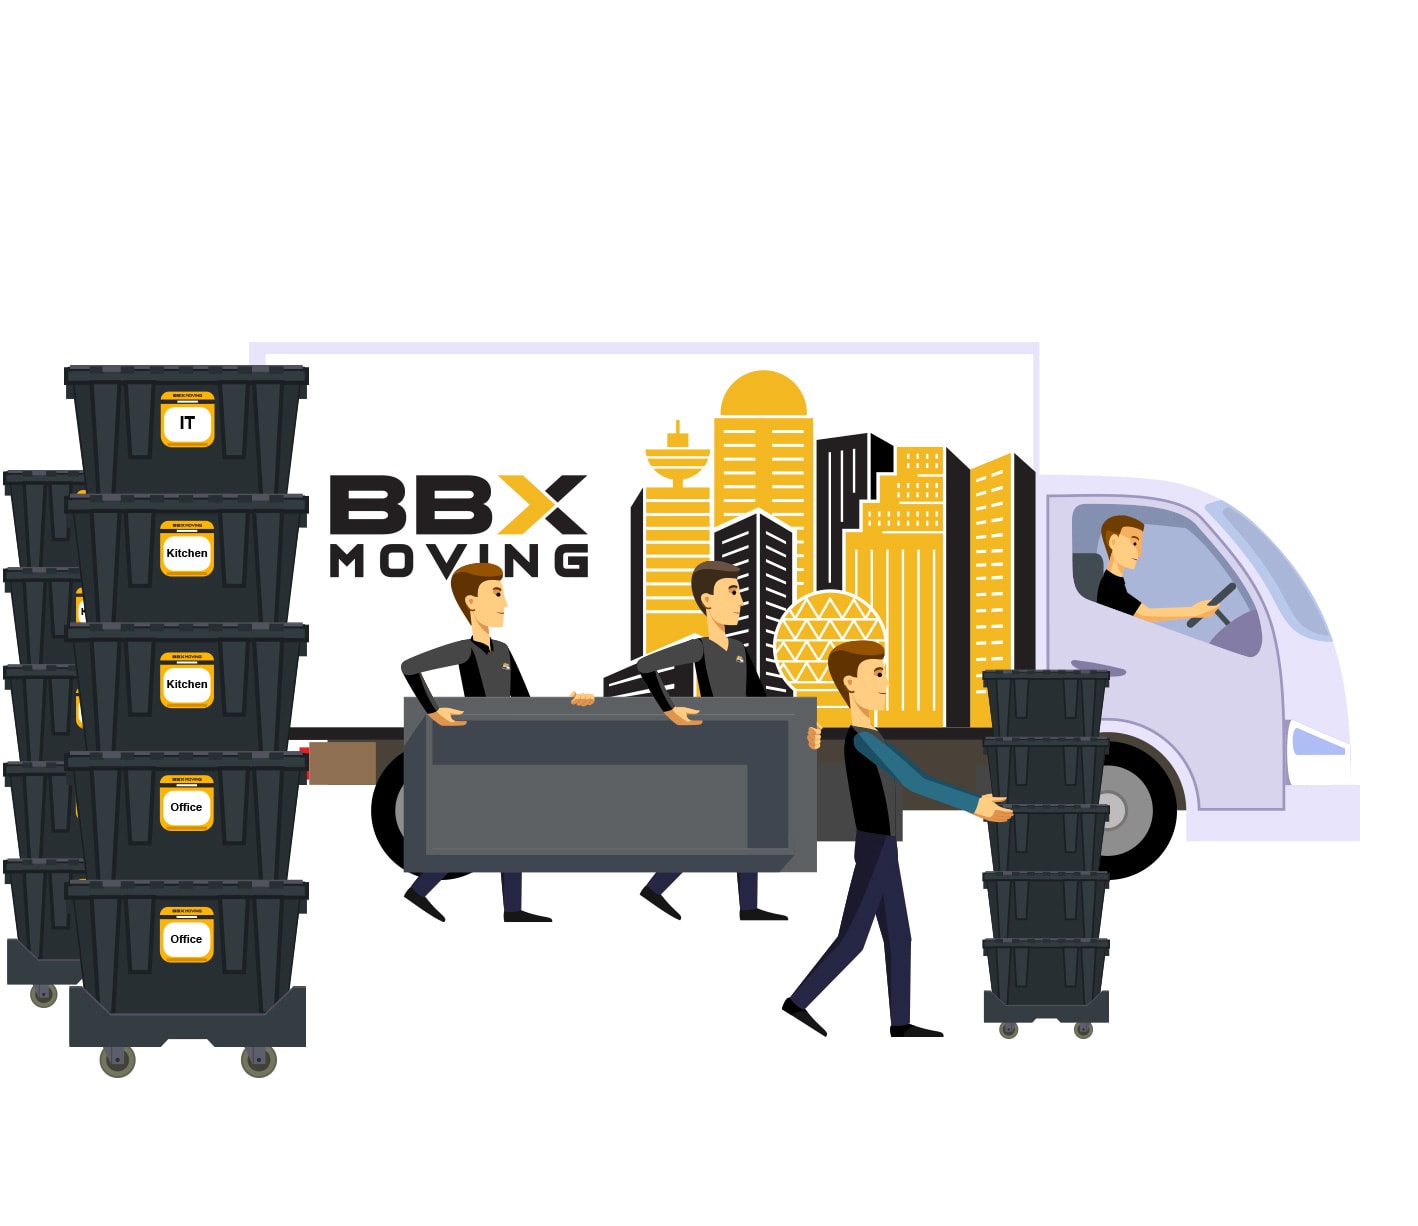 bbx-moving-difference-hire-the-right-person